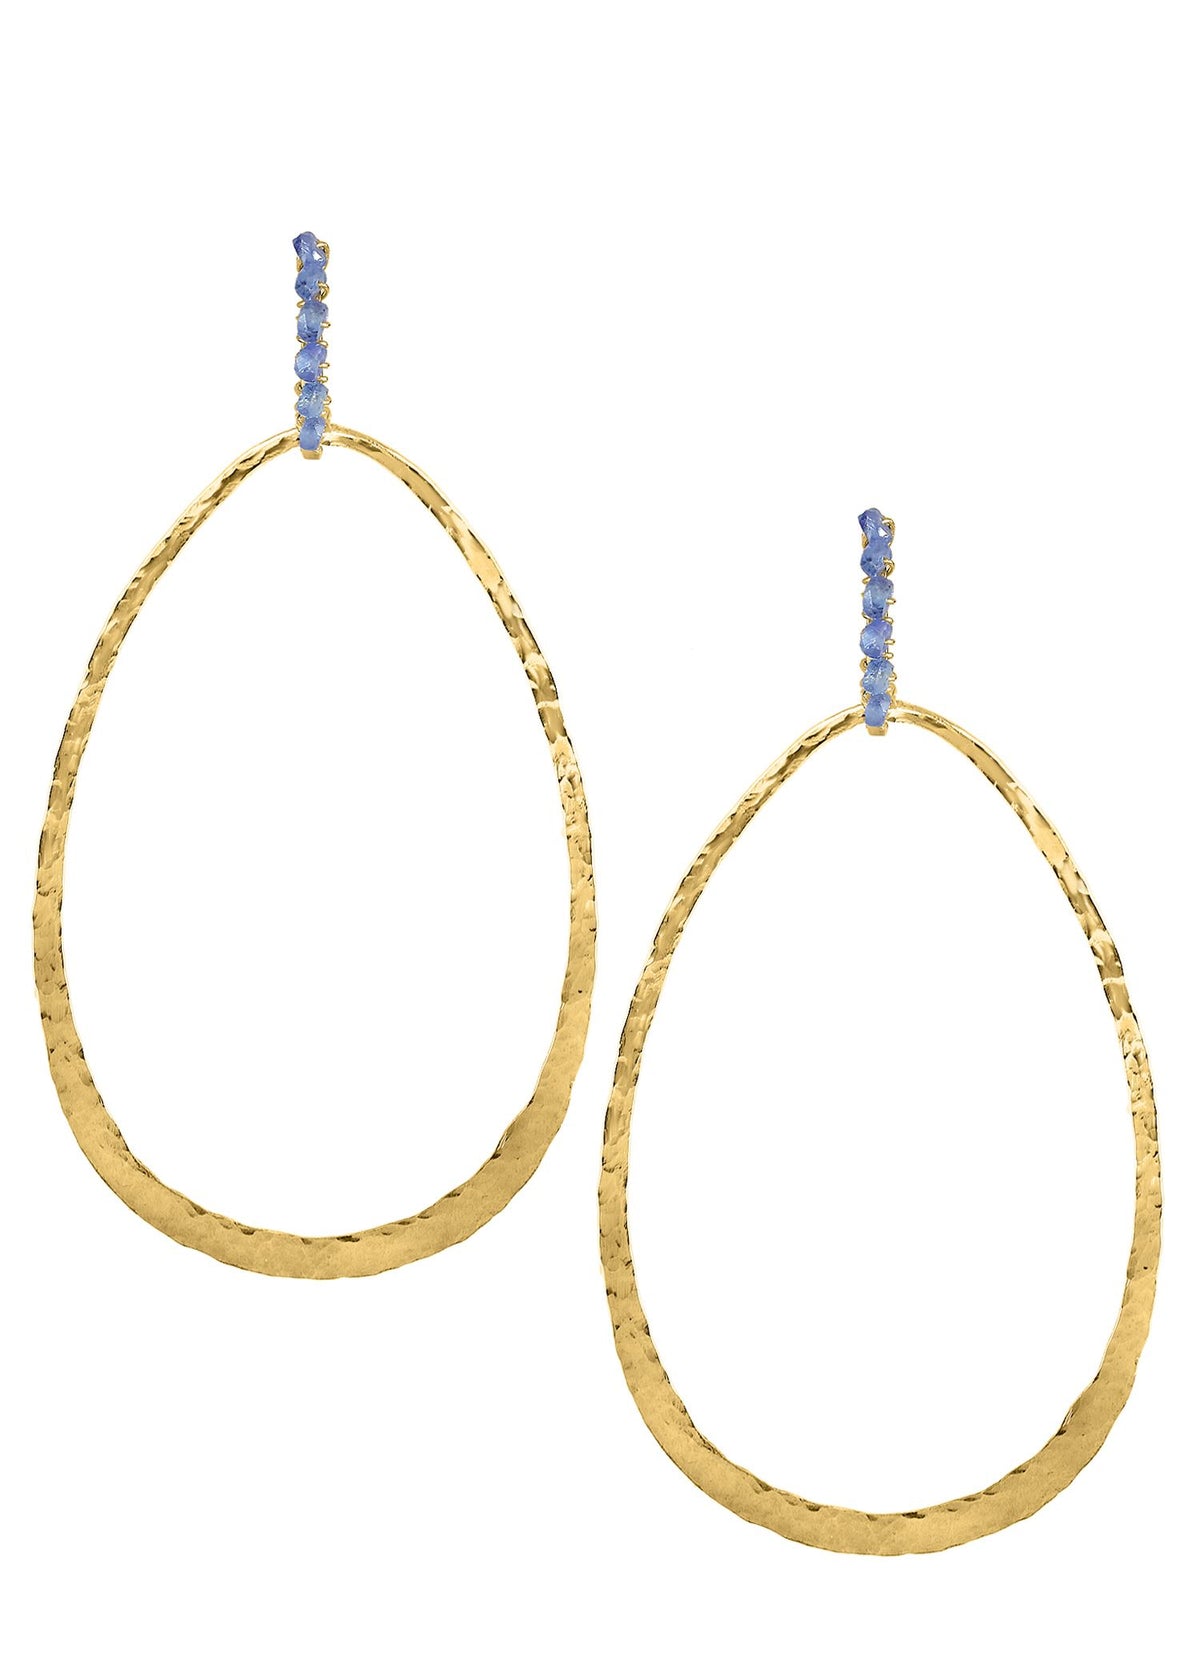 Blue sapphire 14k gold fill Earrings measure 2-5/16&quot; in length (including the levers) and 1-1/8&quot; in width Handmade in our Los Angeles studio